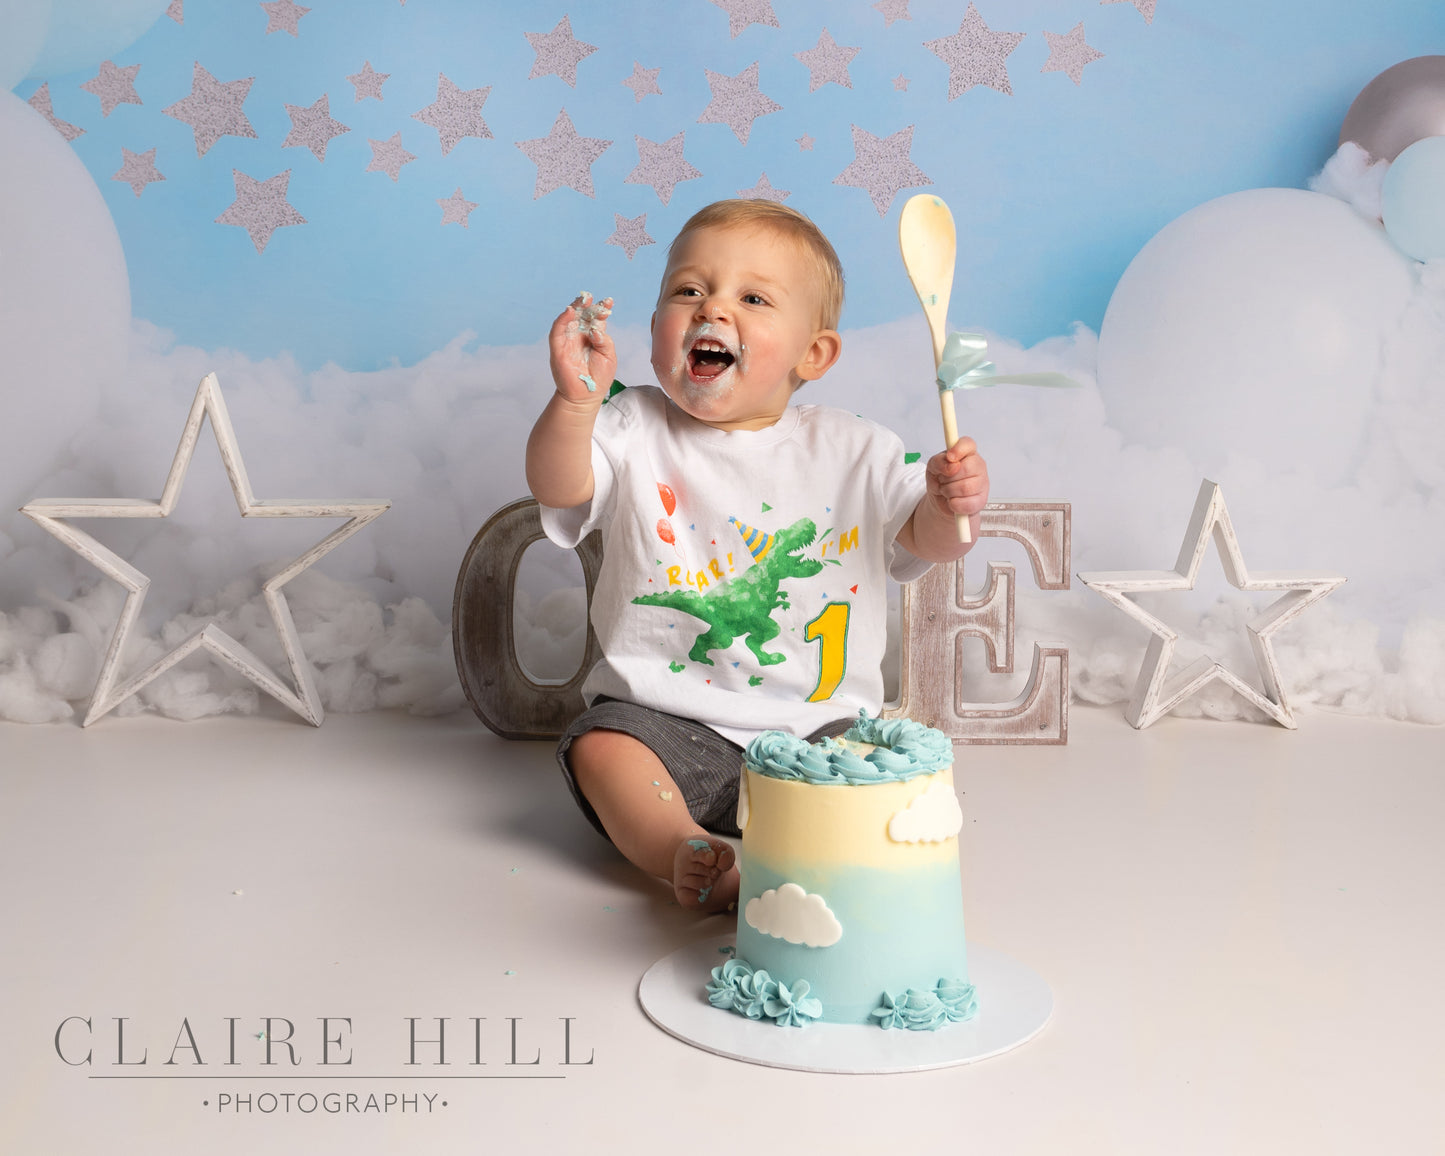 Professional Cake Smash and splash photo shoot with Claire Hill Photography based in Wolverhampton West Midlands near Birmingham, Shropshire, Staffordshire & Telford 